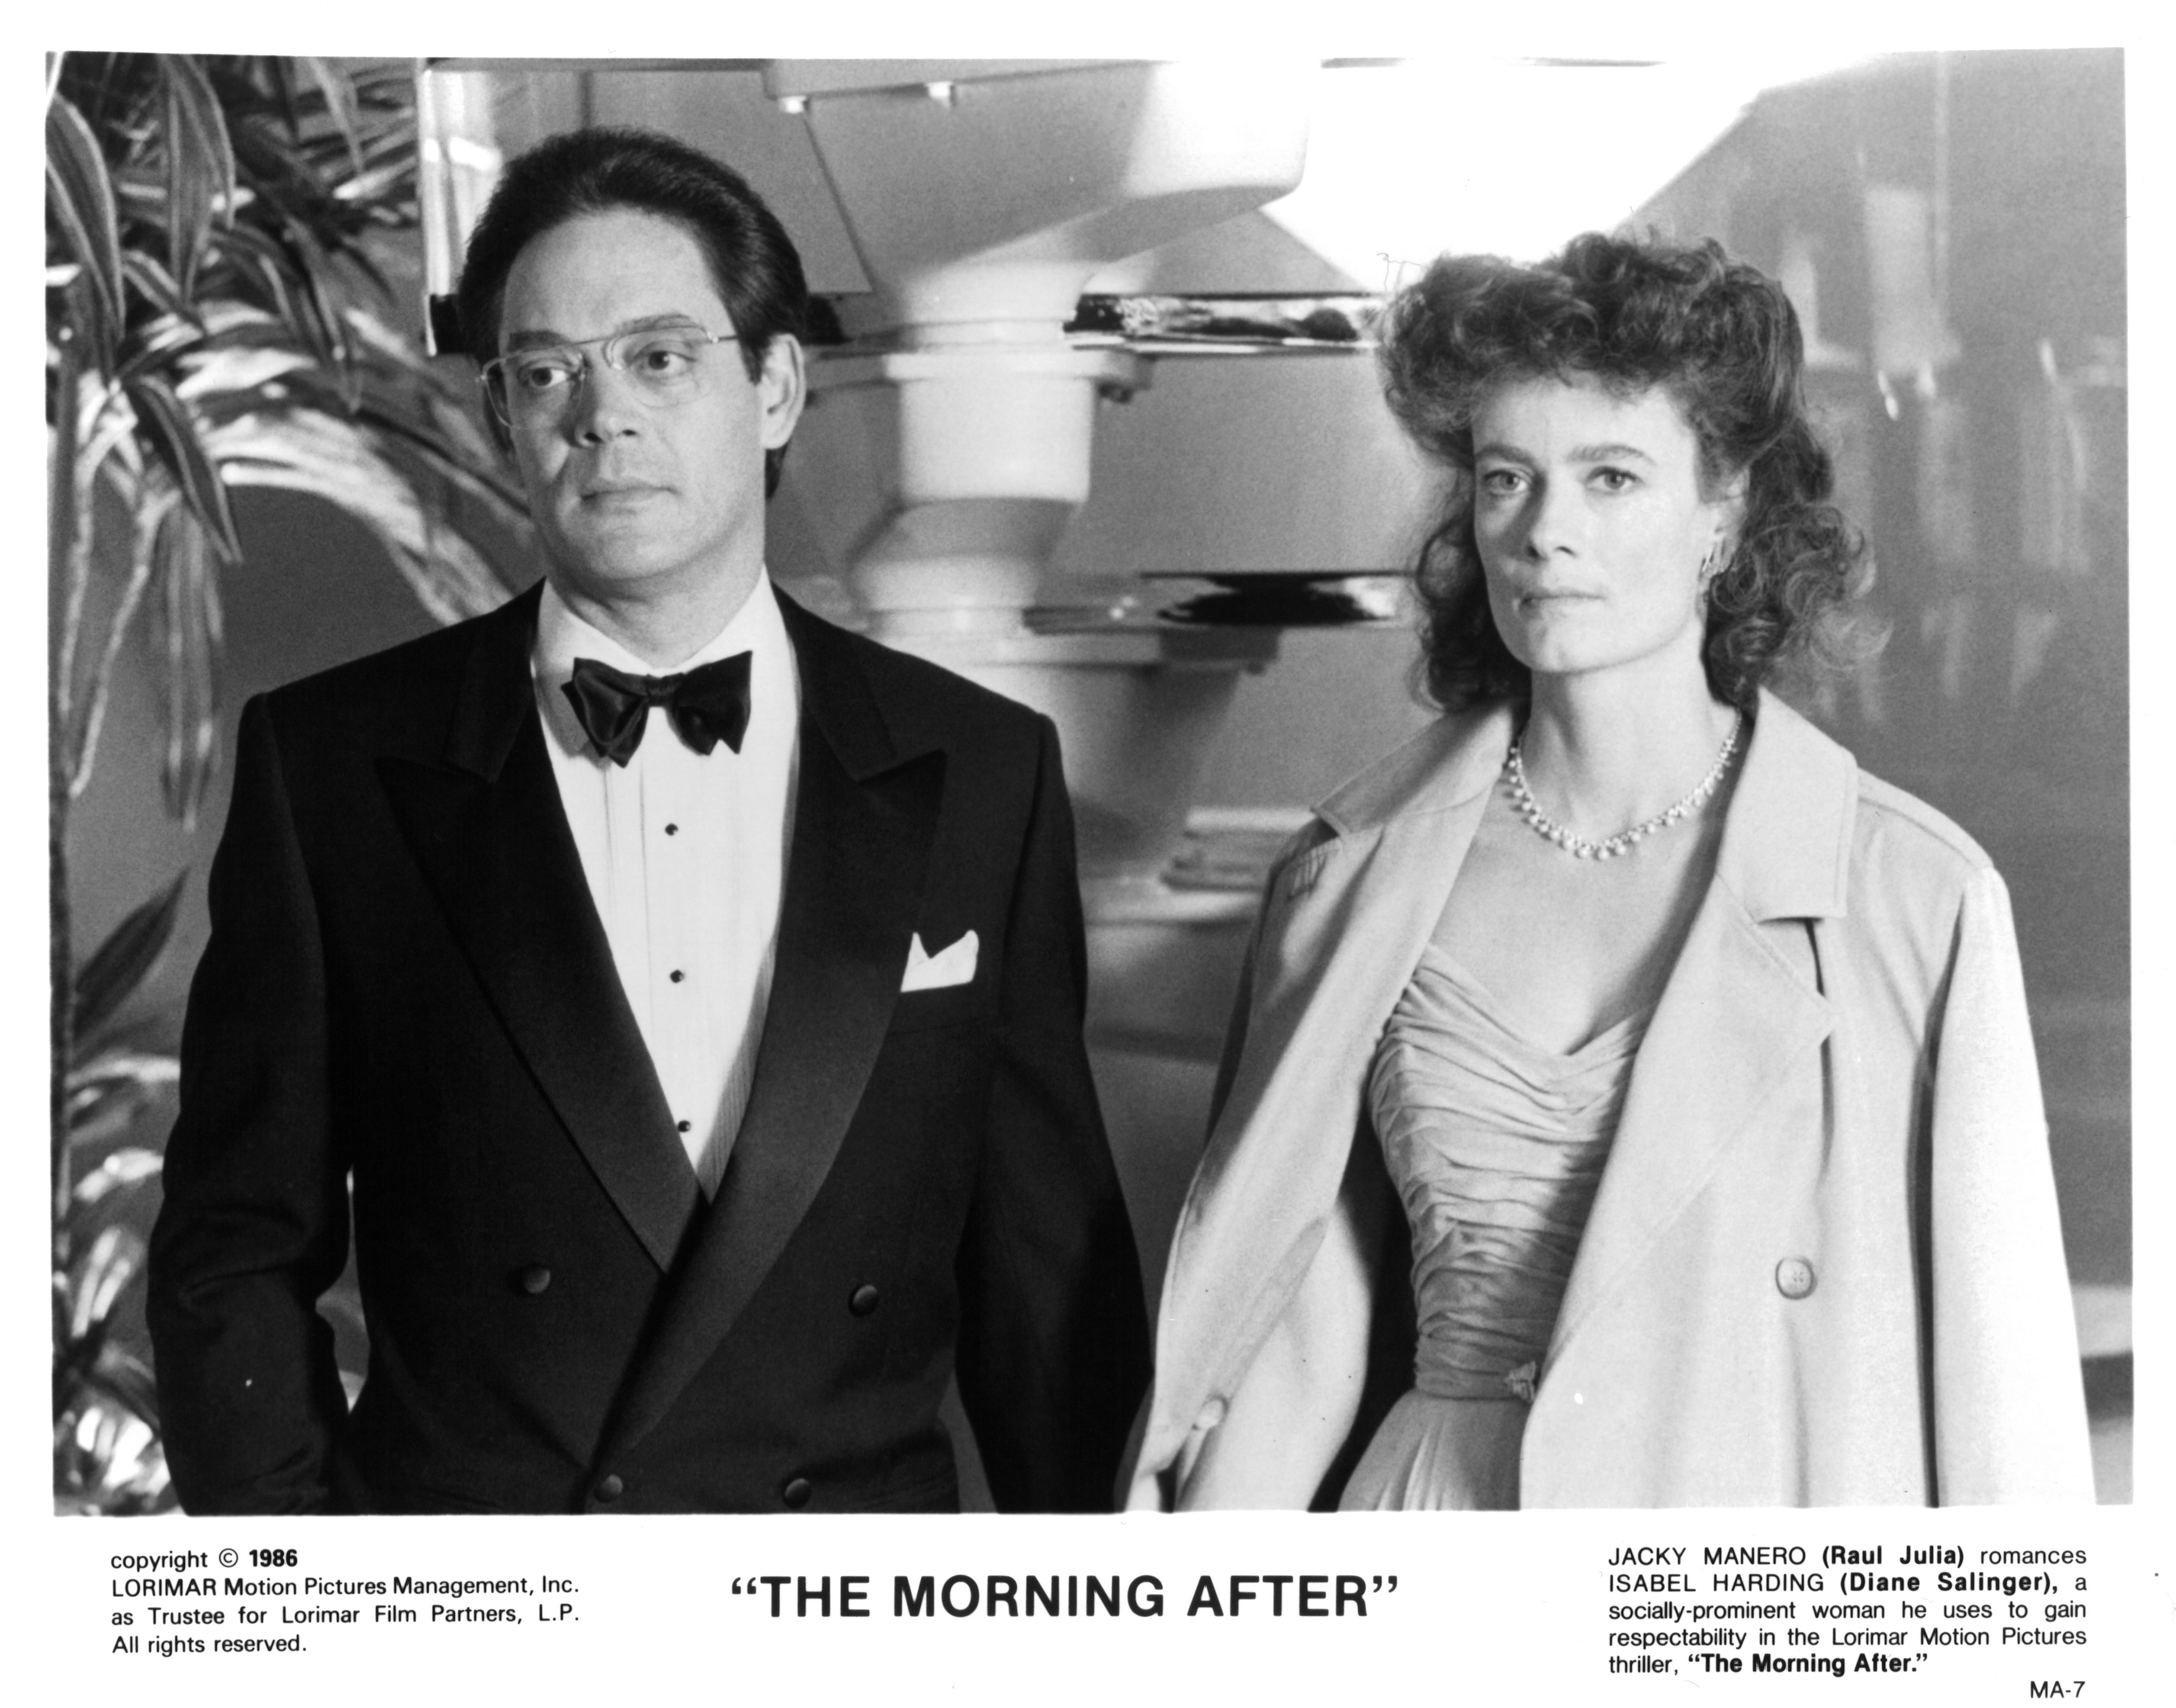 Still of Raul Julia and Diane Salinger in The Morning After (1986)